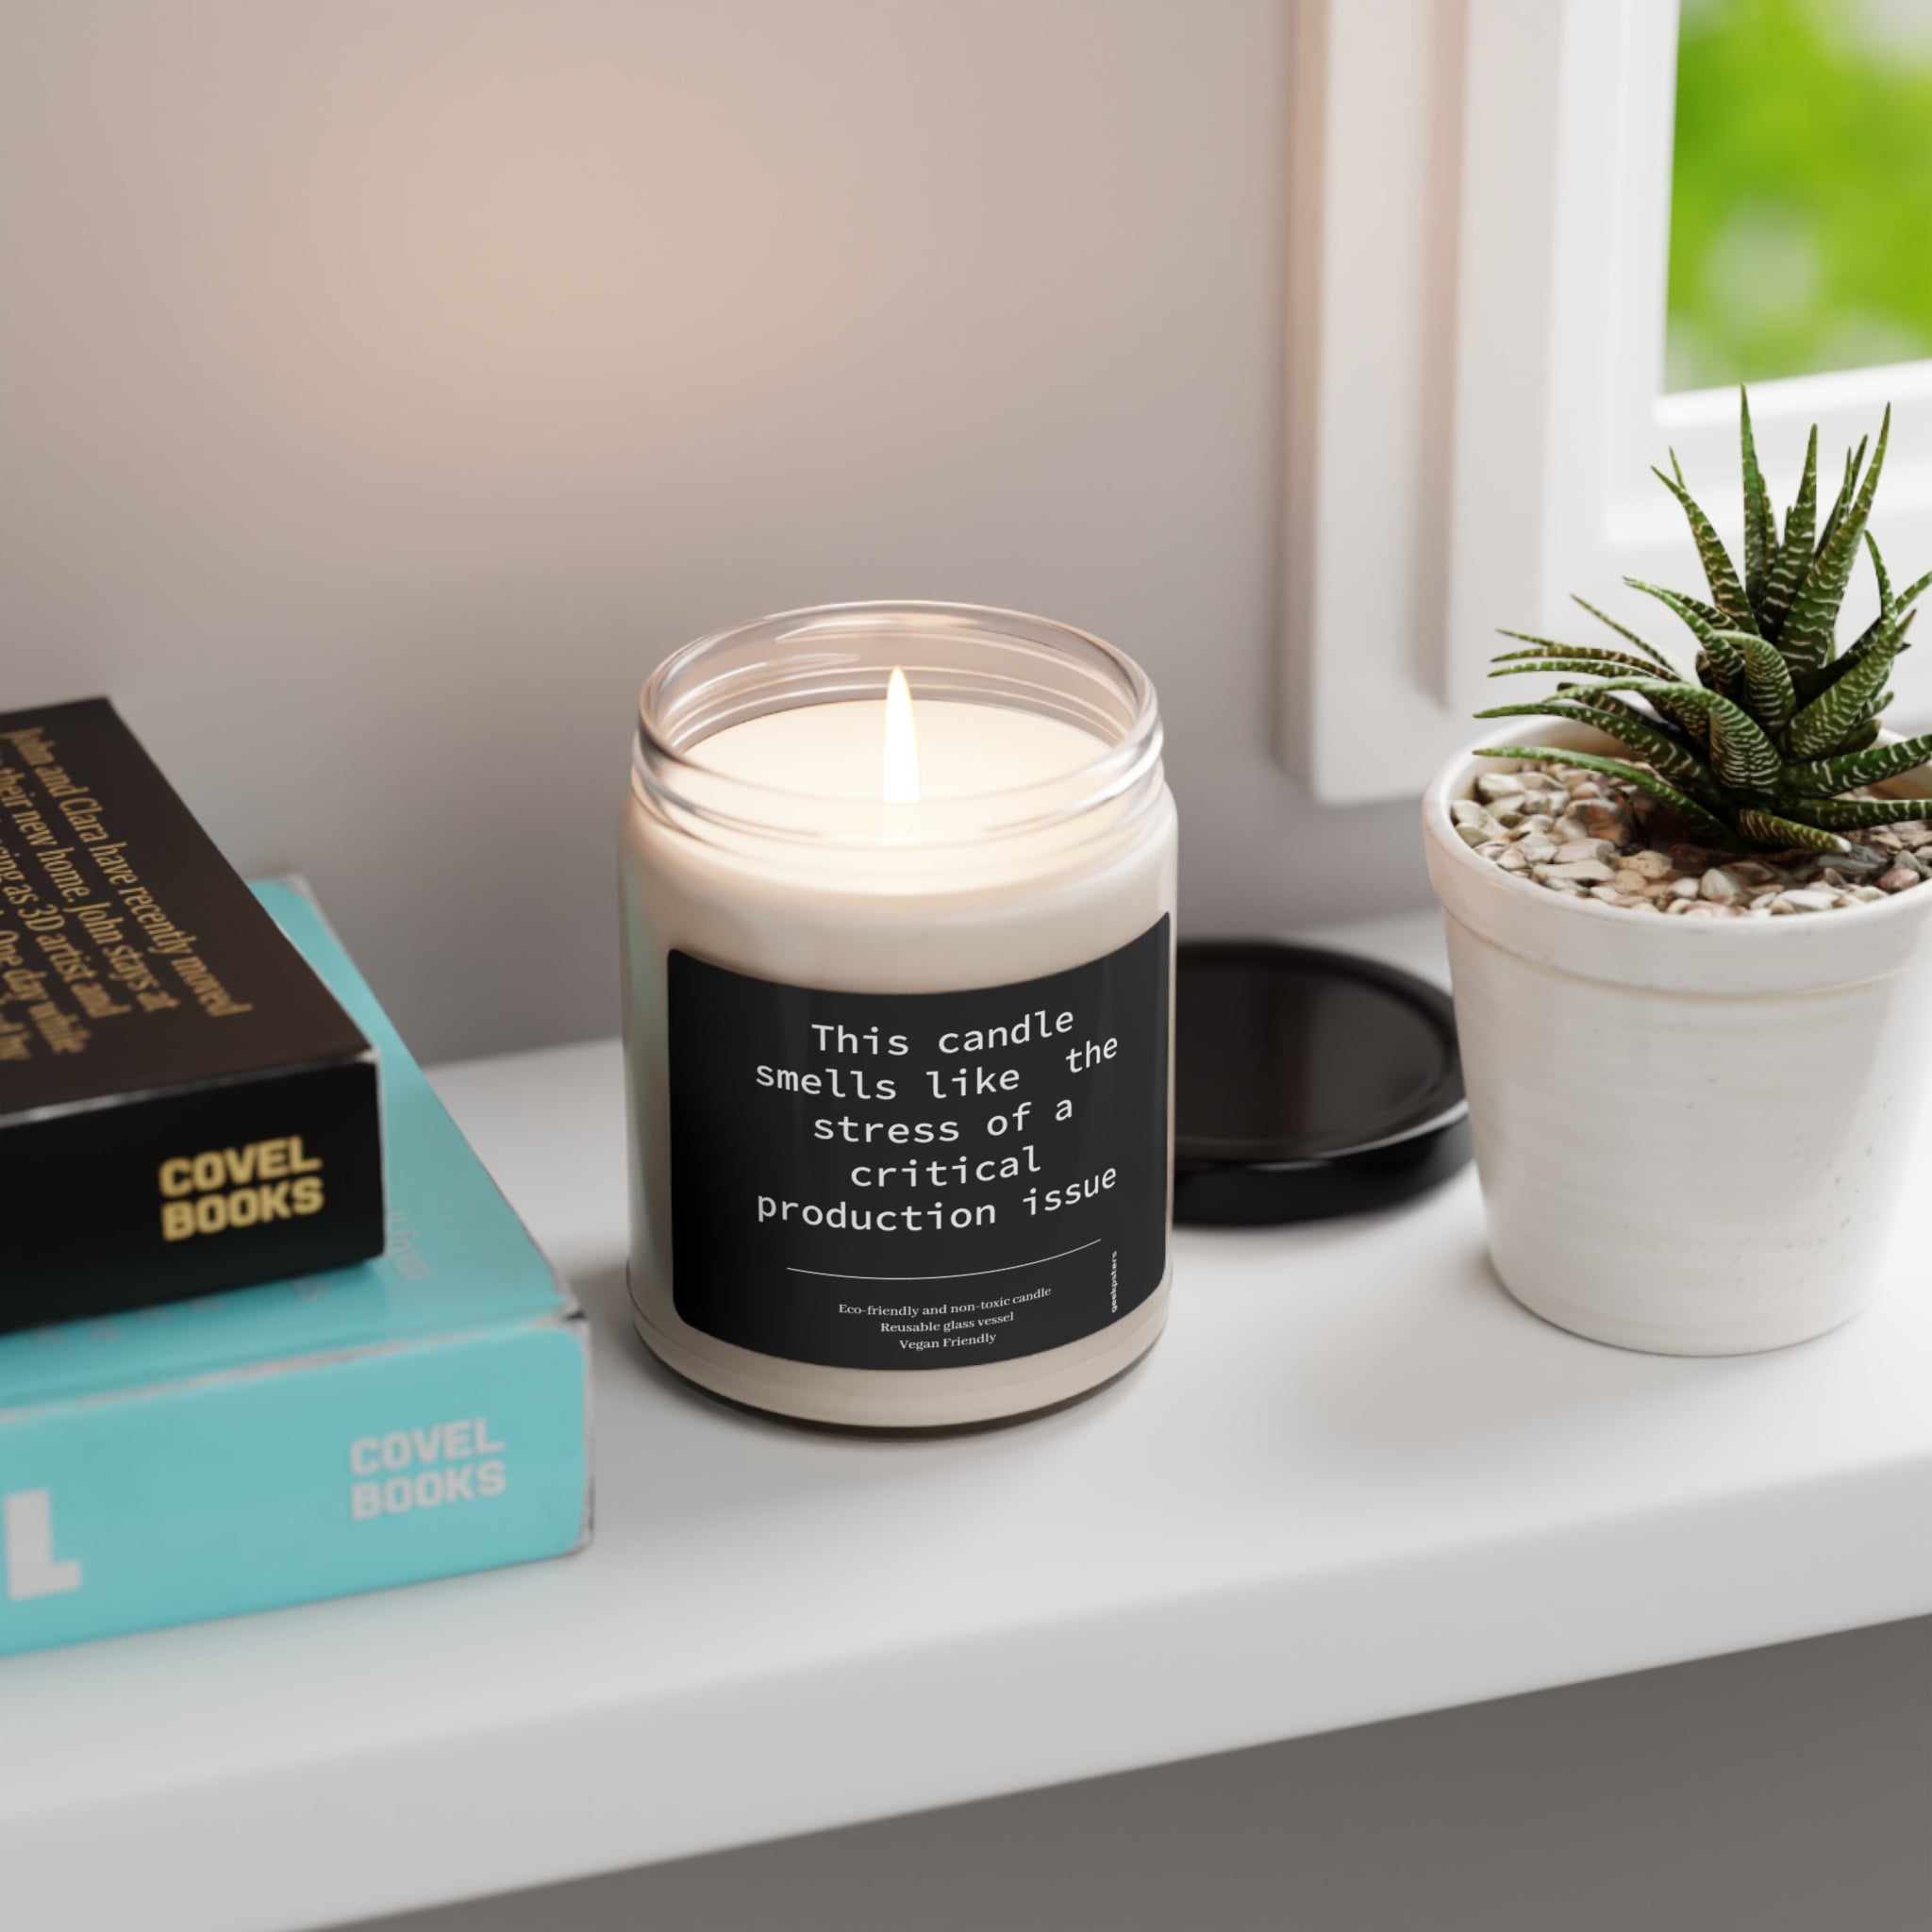 A lit This Candle Smells Like the Stress of a Critical Production Issue - Scented Soy Candle, 9oz with a humorous label next to books and a succulent on a windowsill.